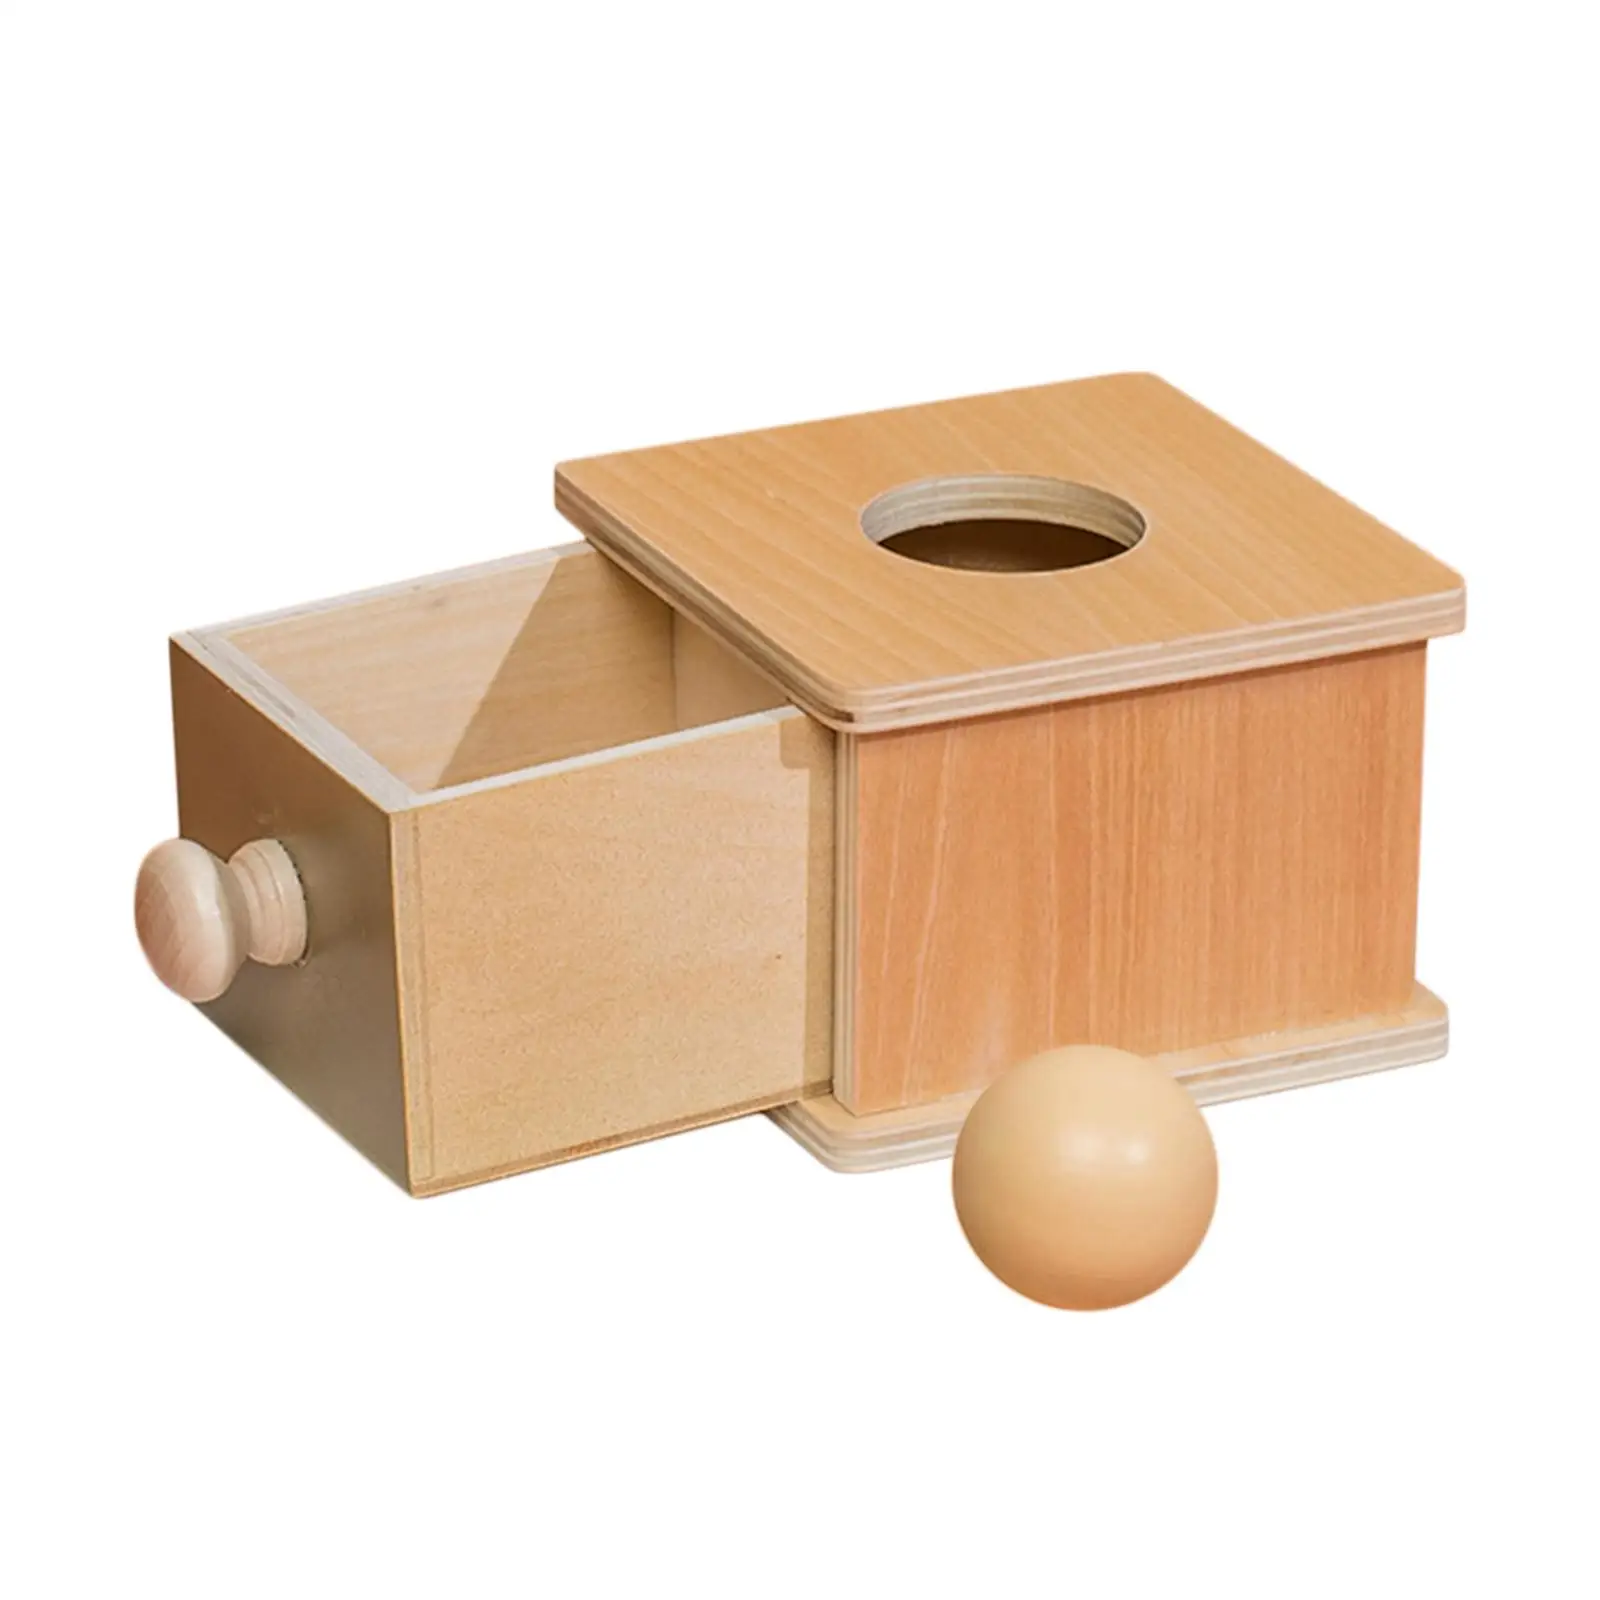 Object Permanence Box Learning Materials for Children Aged 8 to 24